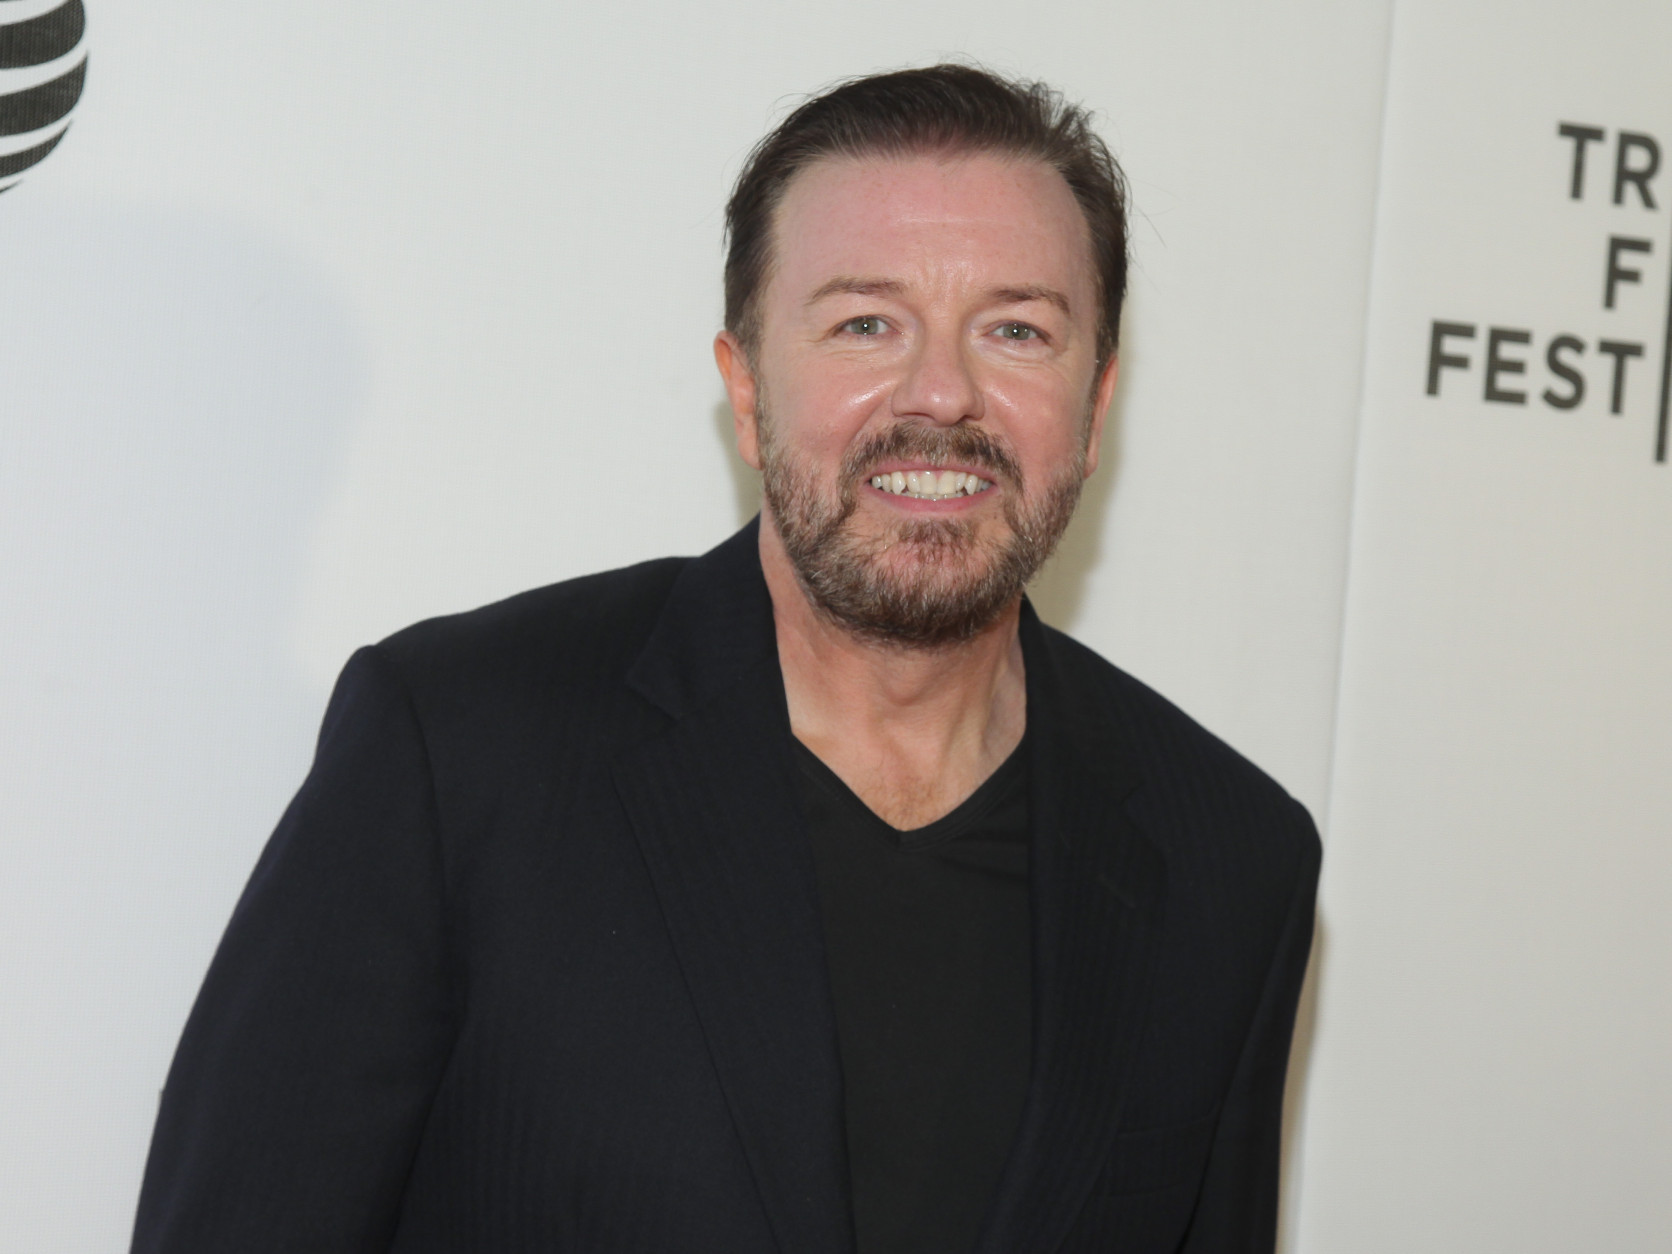 Ricky Gervais attends Tribeca Talks After the Movie: "Special Correspondents" during the 2016 Tribeca Film Festival at John Zuccotti Theater at BMCC Tribeca Performing Arts Center on Friday, April 22, 2016, in New York. (Photo by Andy Kropa/Invision/AP)